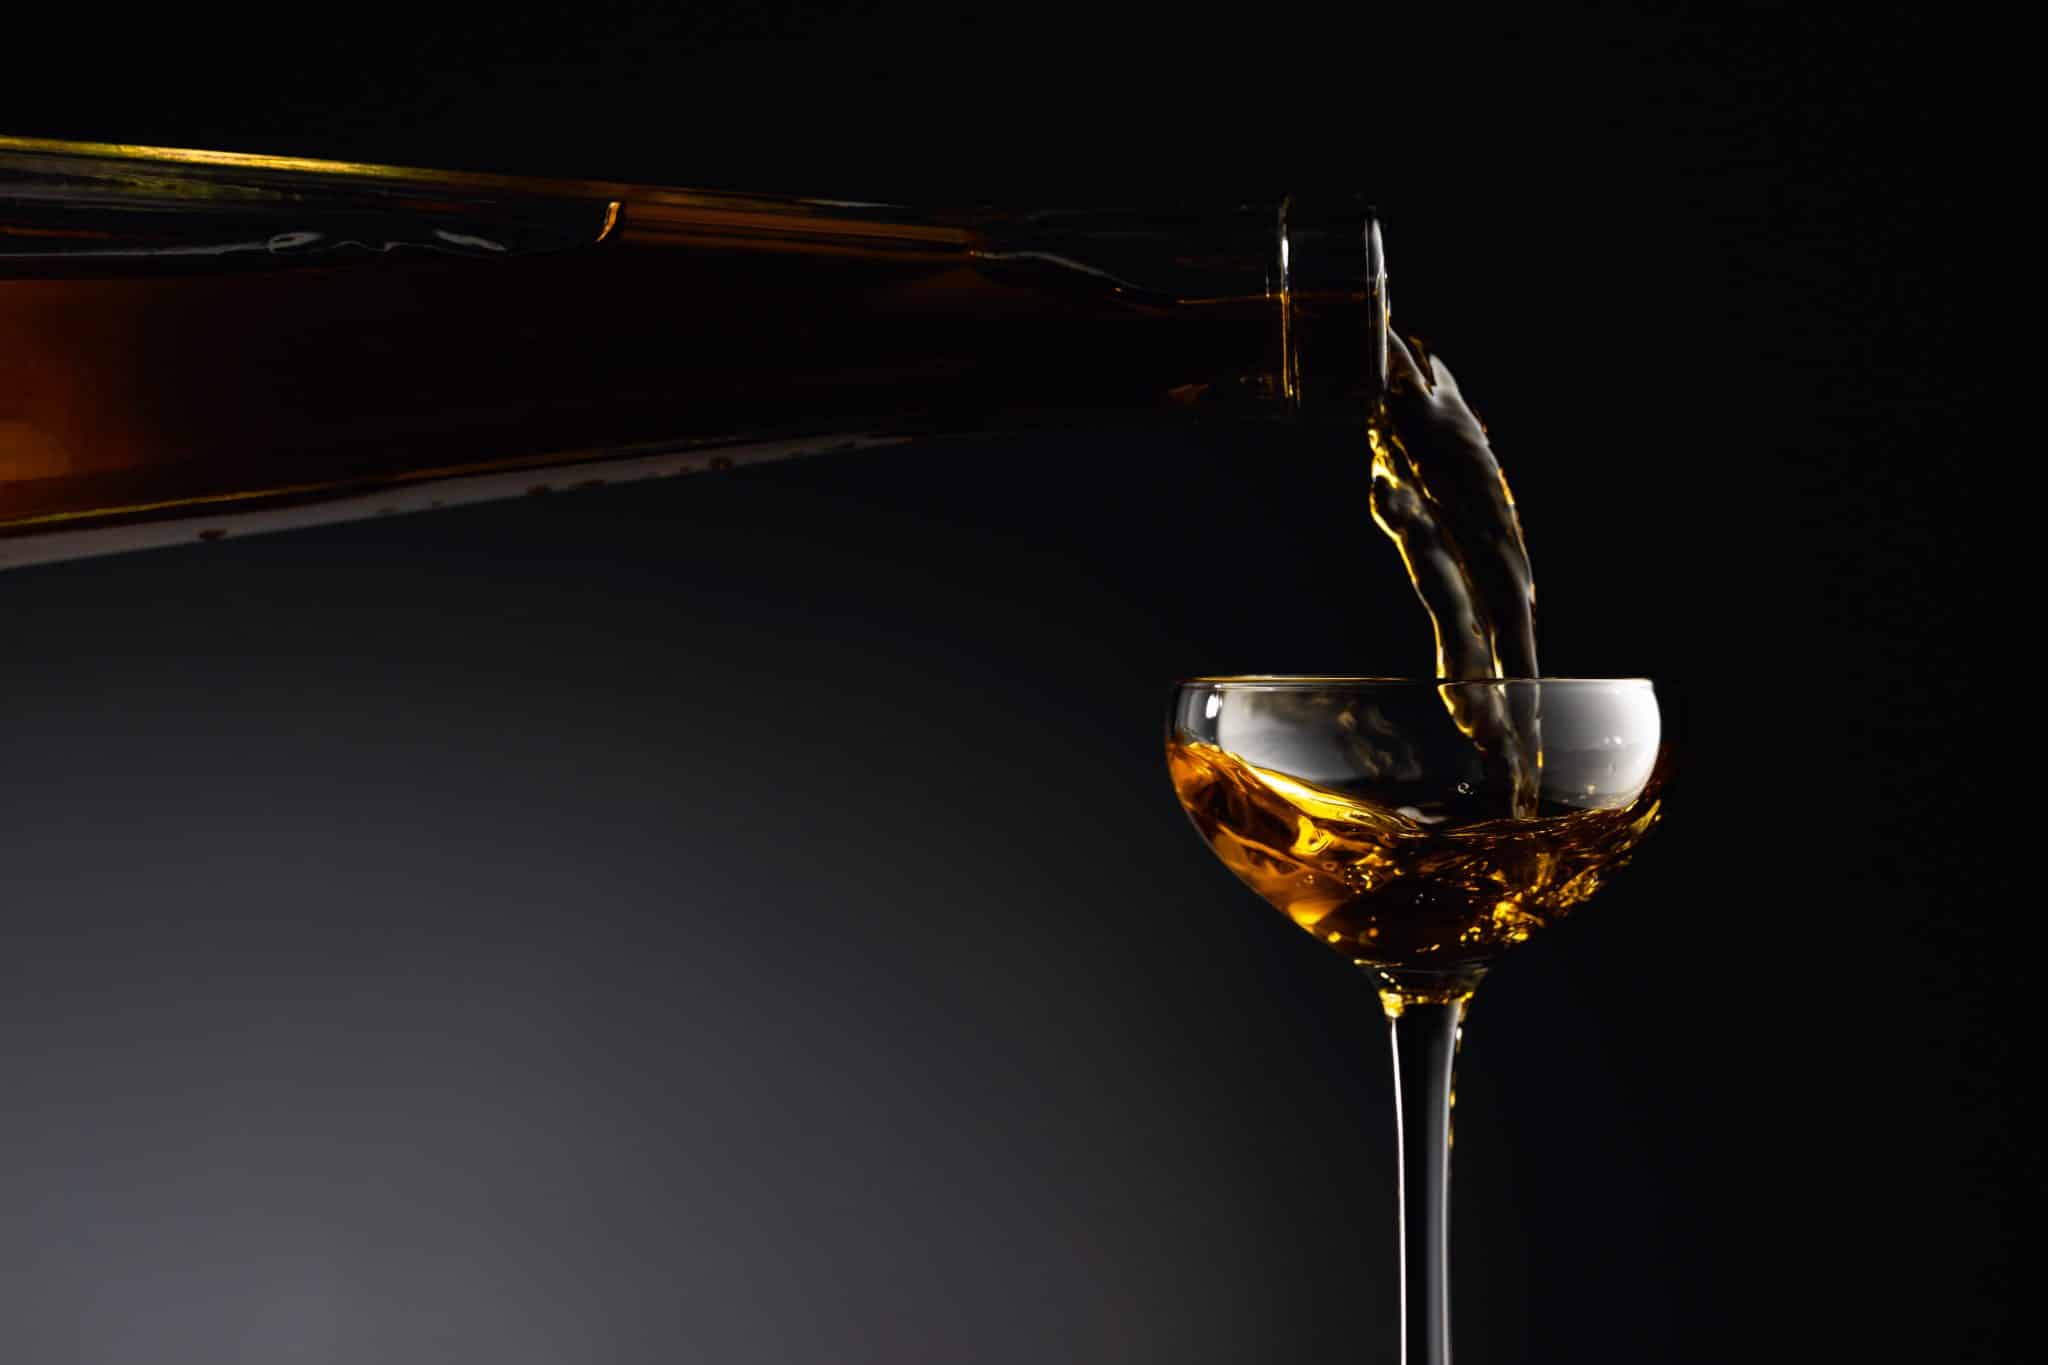 The image shows a bottle tilted and pouring a fortified wine into a wine glass against a dark background.